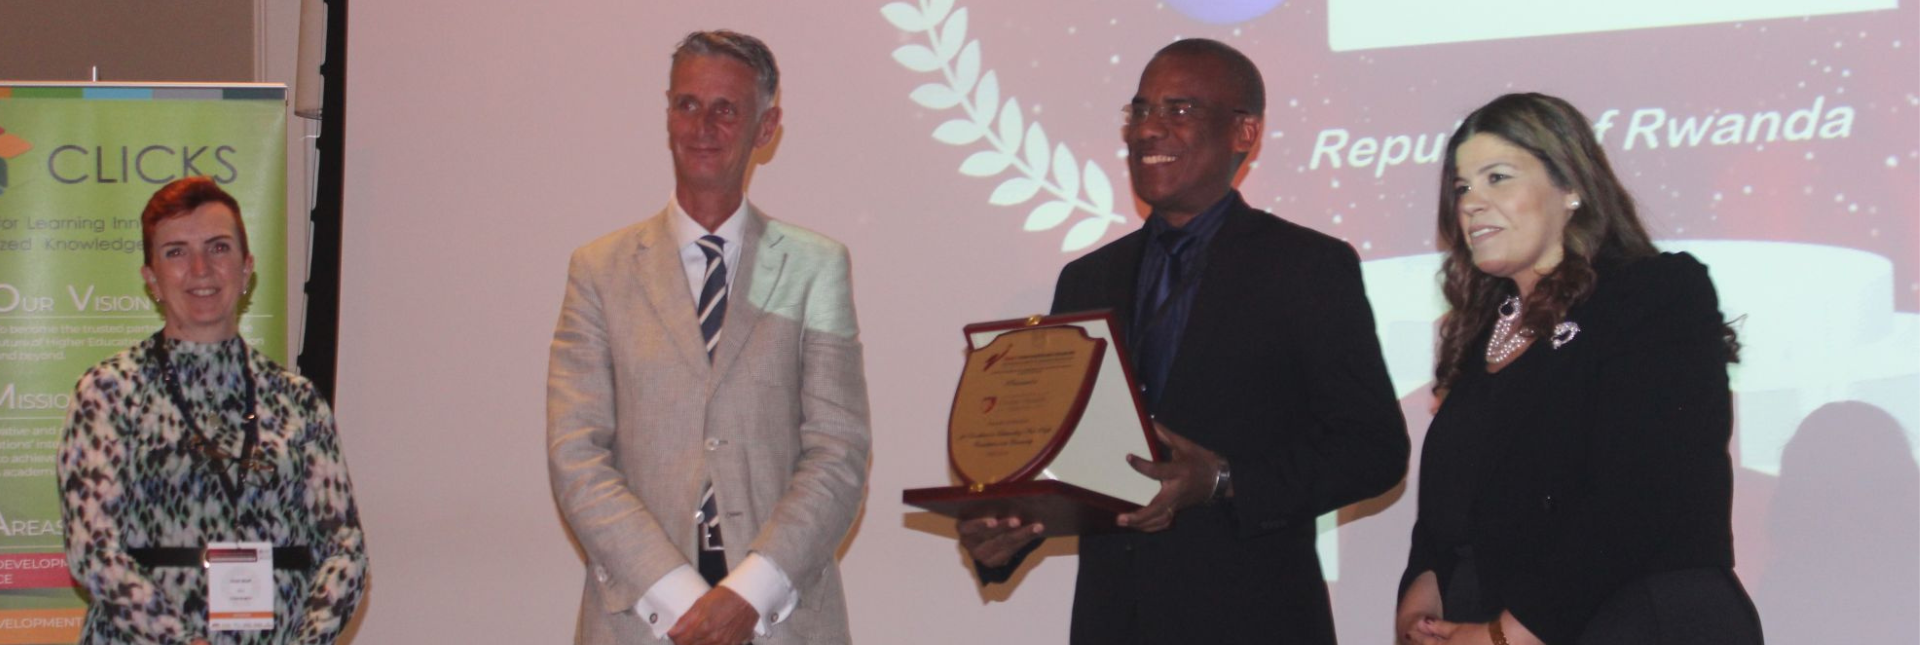 UGHE Recognized Internationally for its Community Engagement and Higher Education Excellence